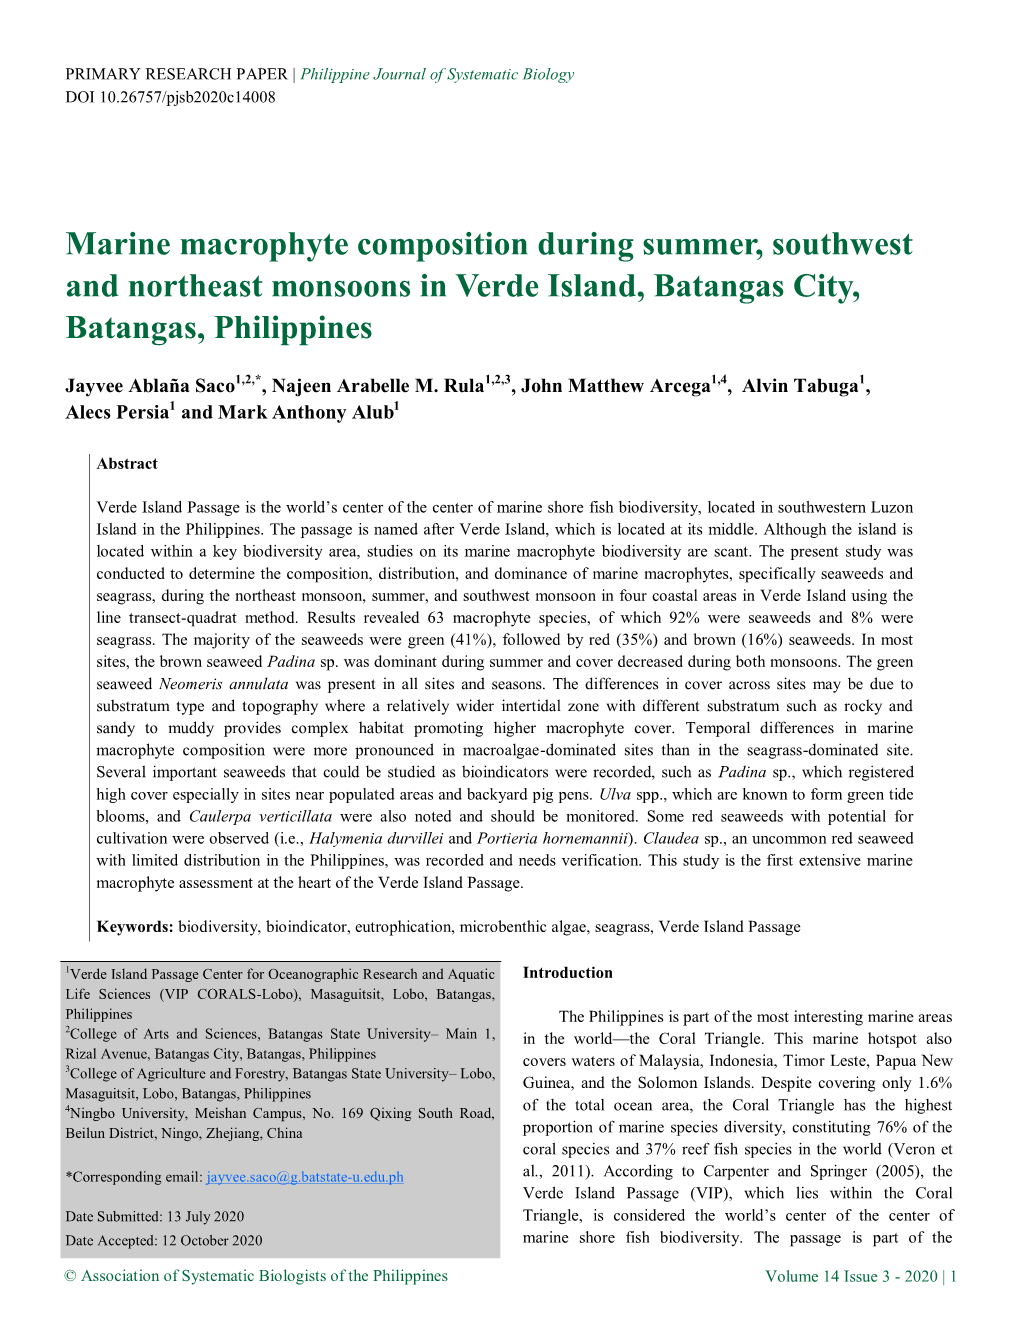 Marine Macrophyte Composition During Summer, Southwest and Northeast Monsoons in Verde Island, Batangas City, Batangas, Philippines